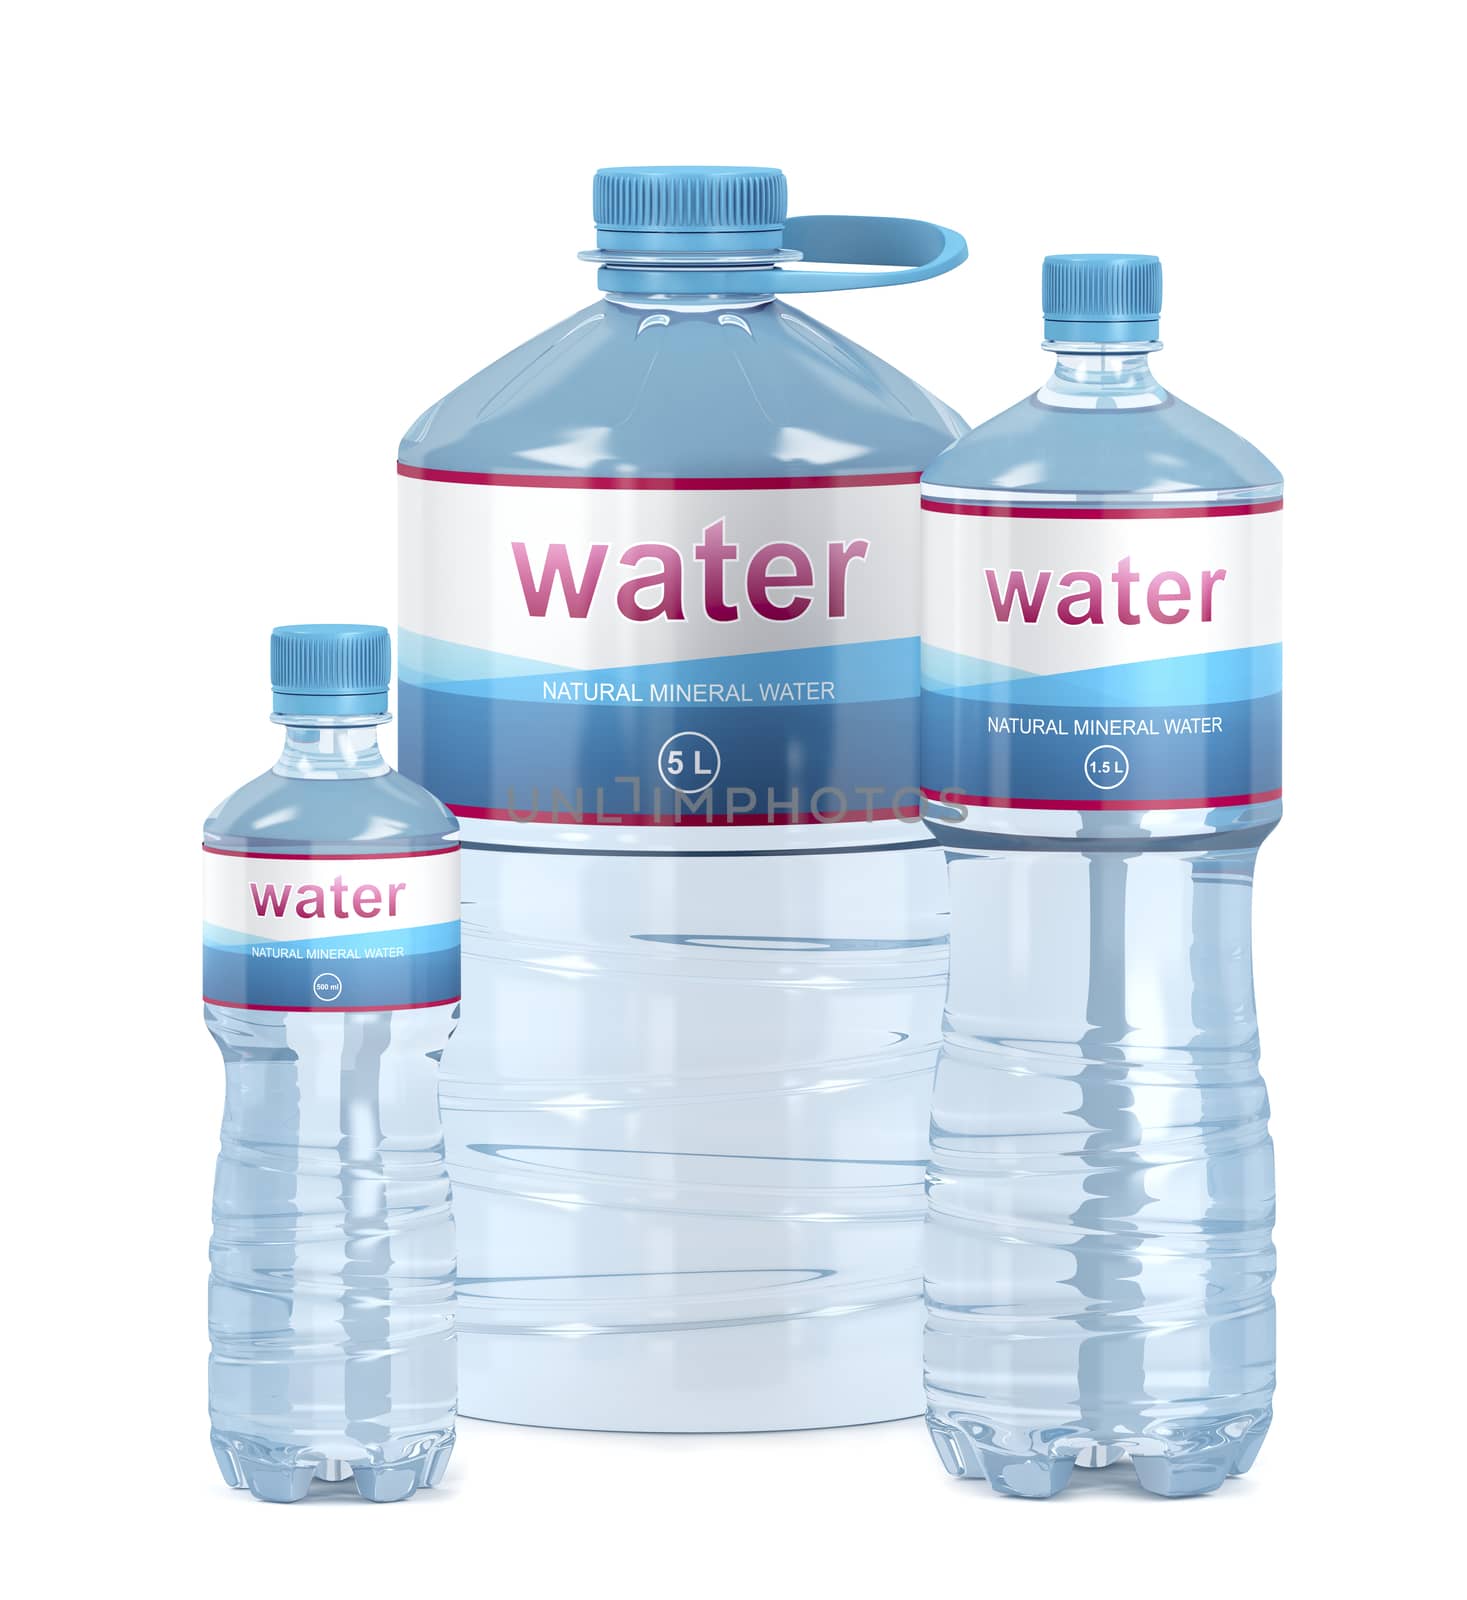 Different water bottles on white background by magraphics